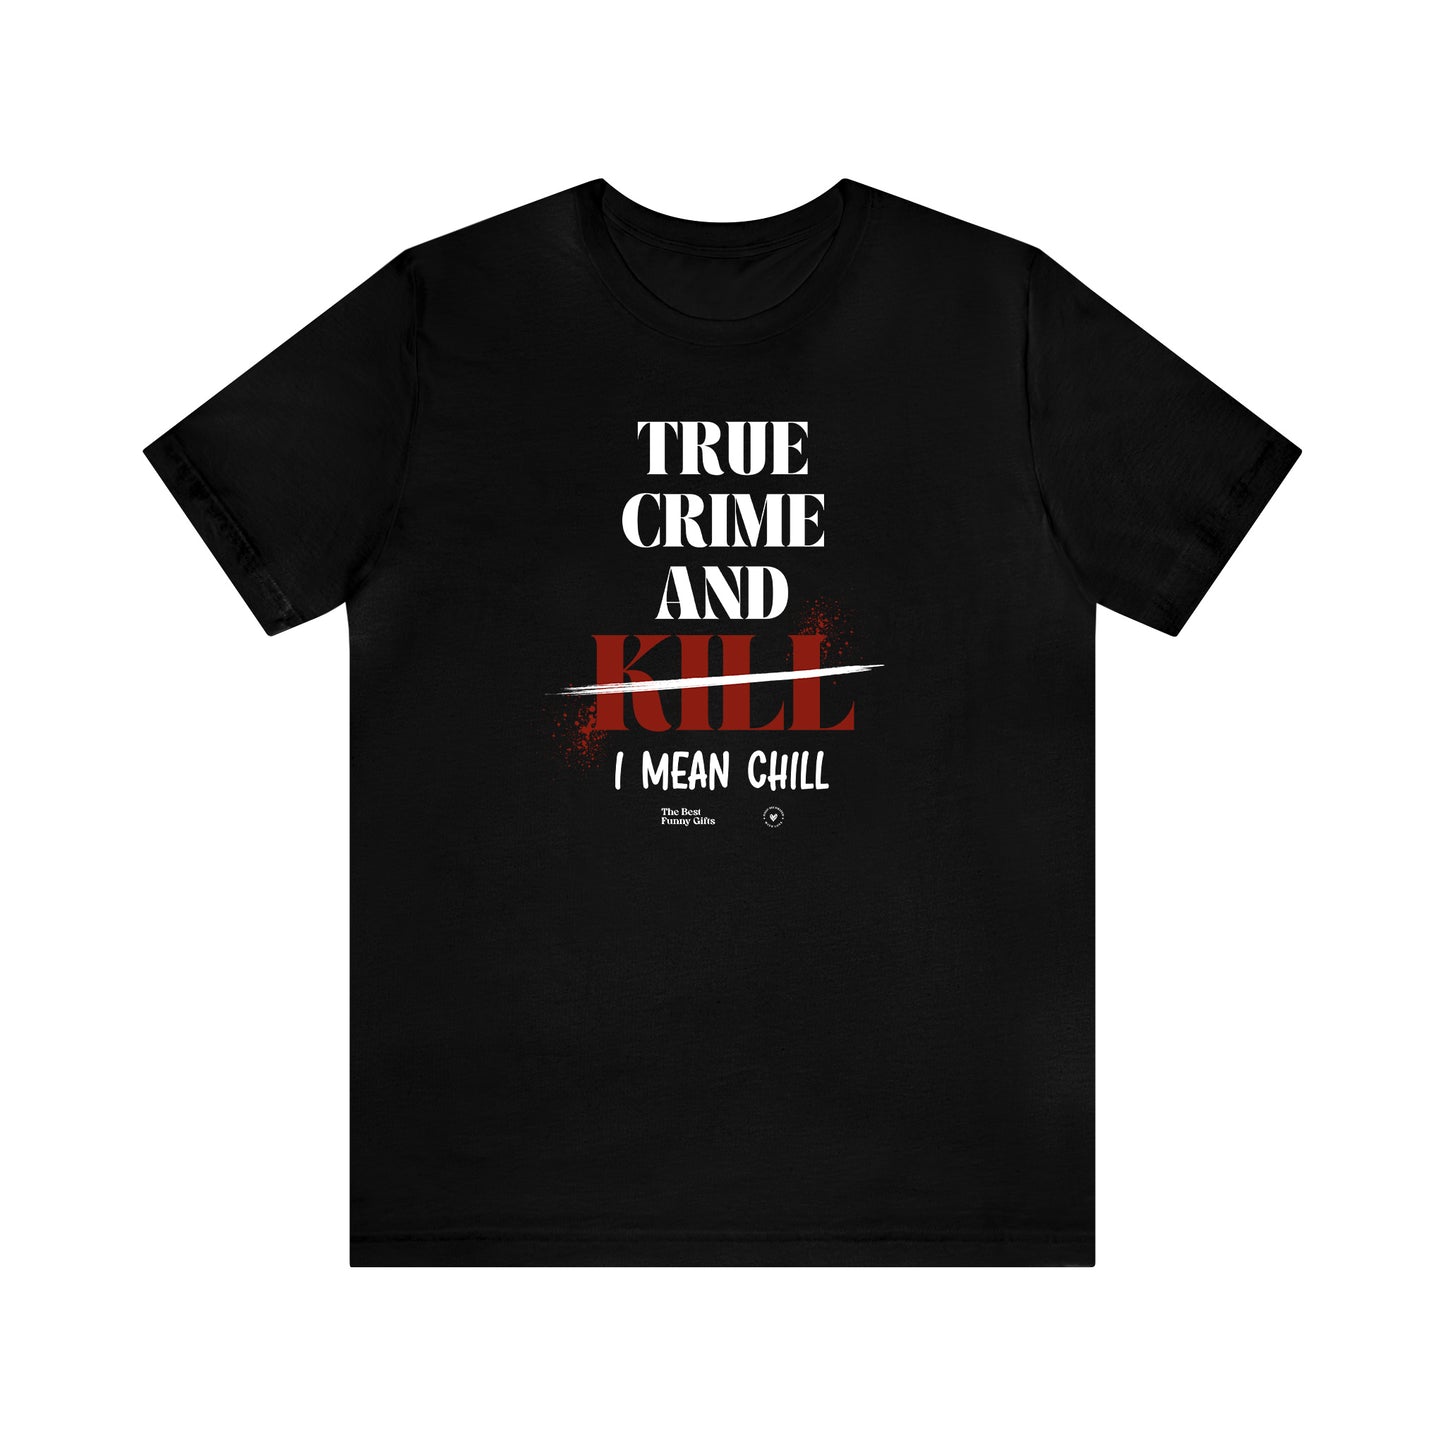 Funny Shirts for Women - True Crime and Kill... I Mean Chill - Women’s T Shirts